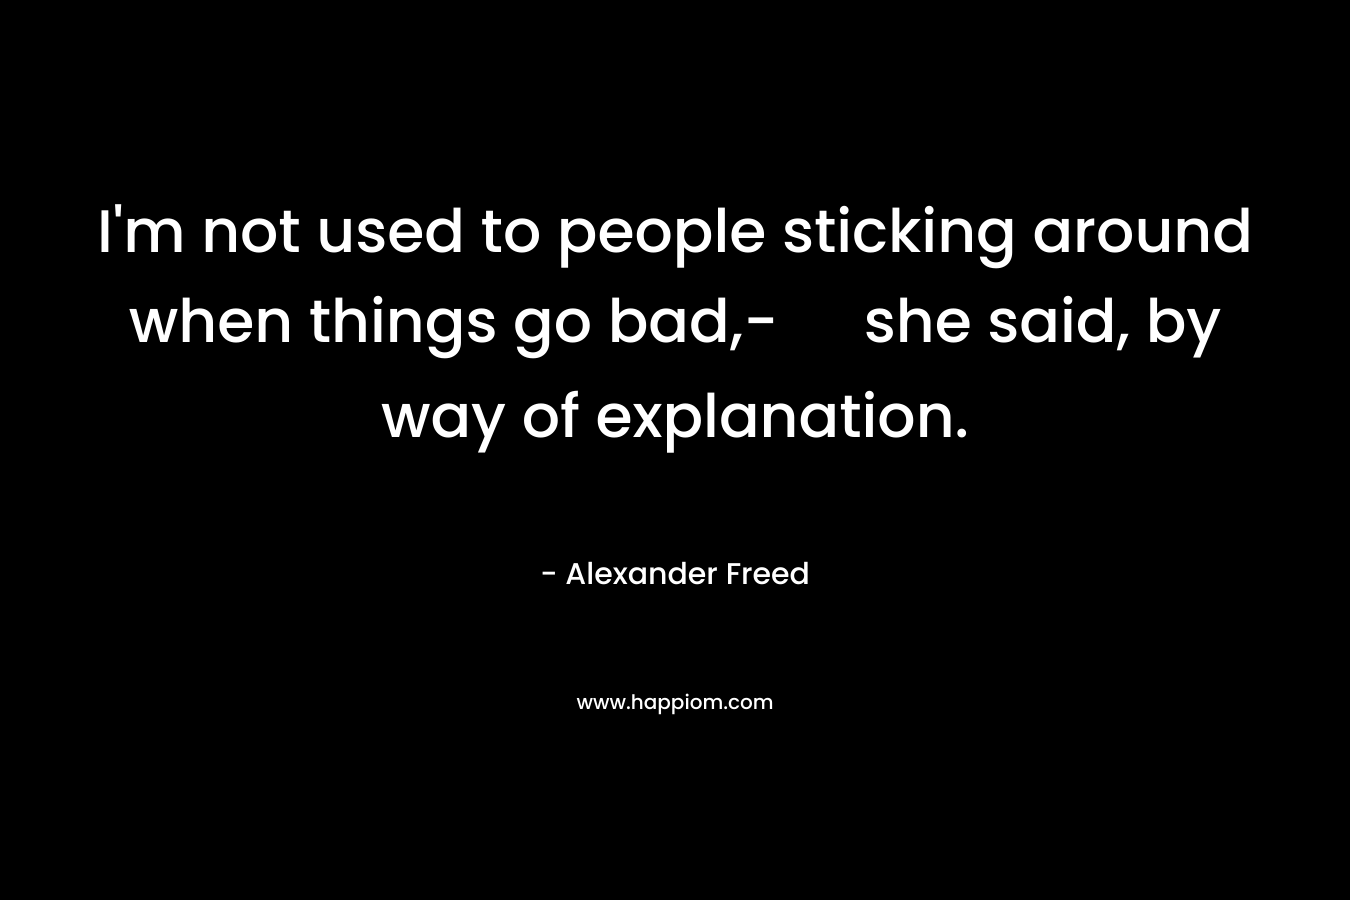 I’m not used to people sticking around when things go bad,- she said, by way of explanation. – Alexander Freed